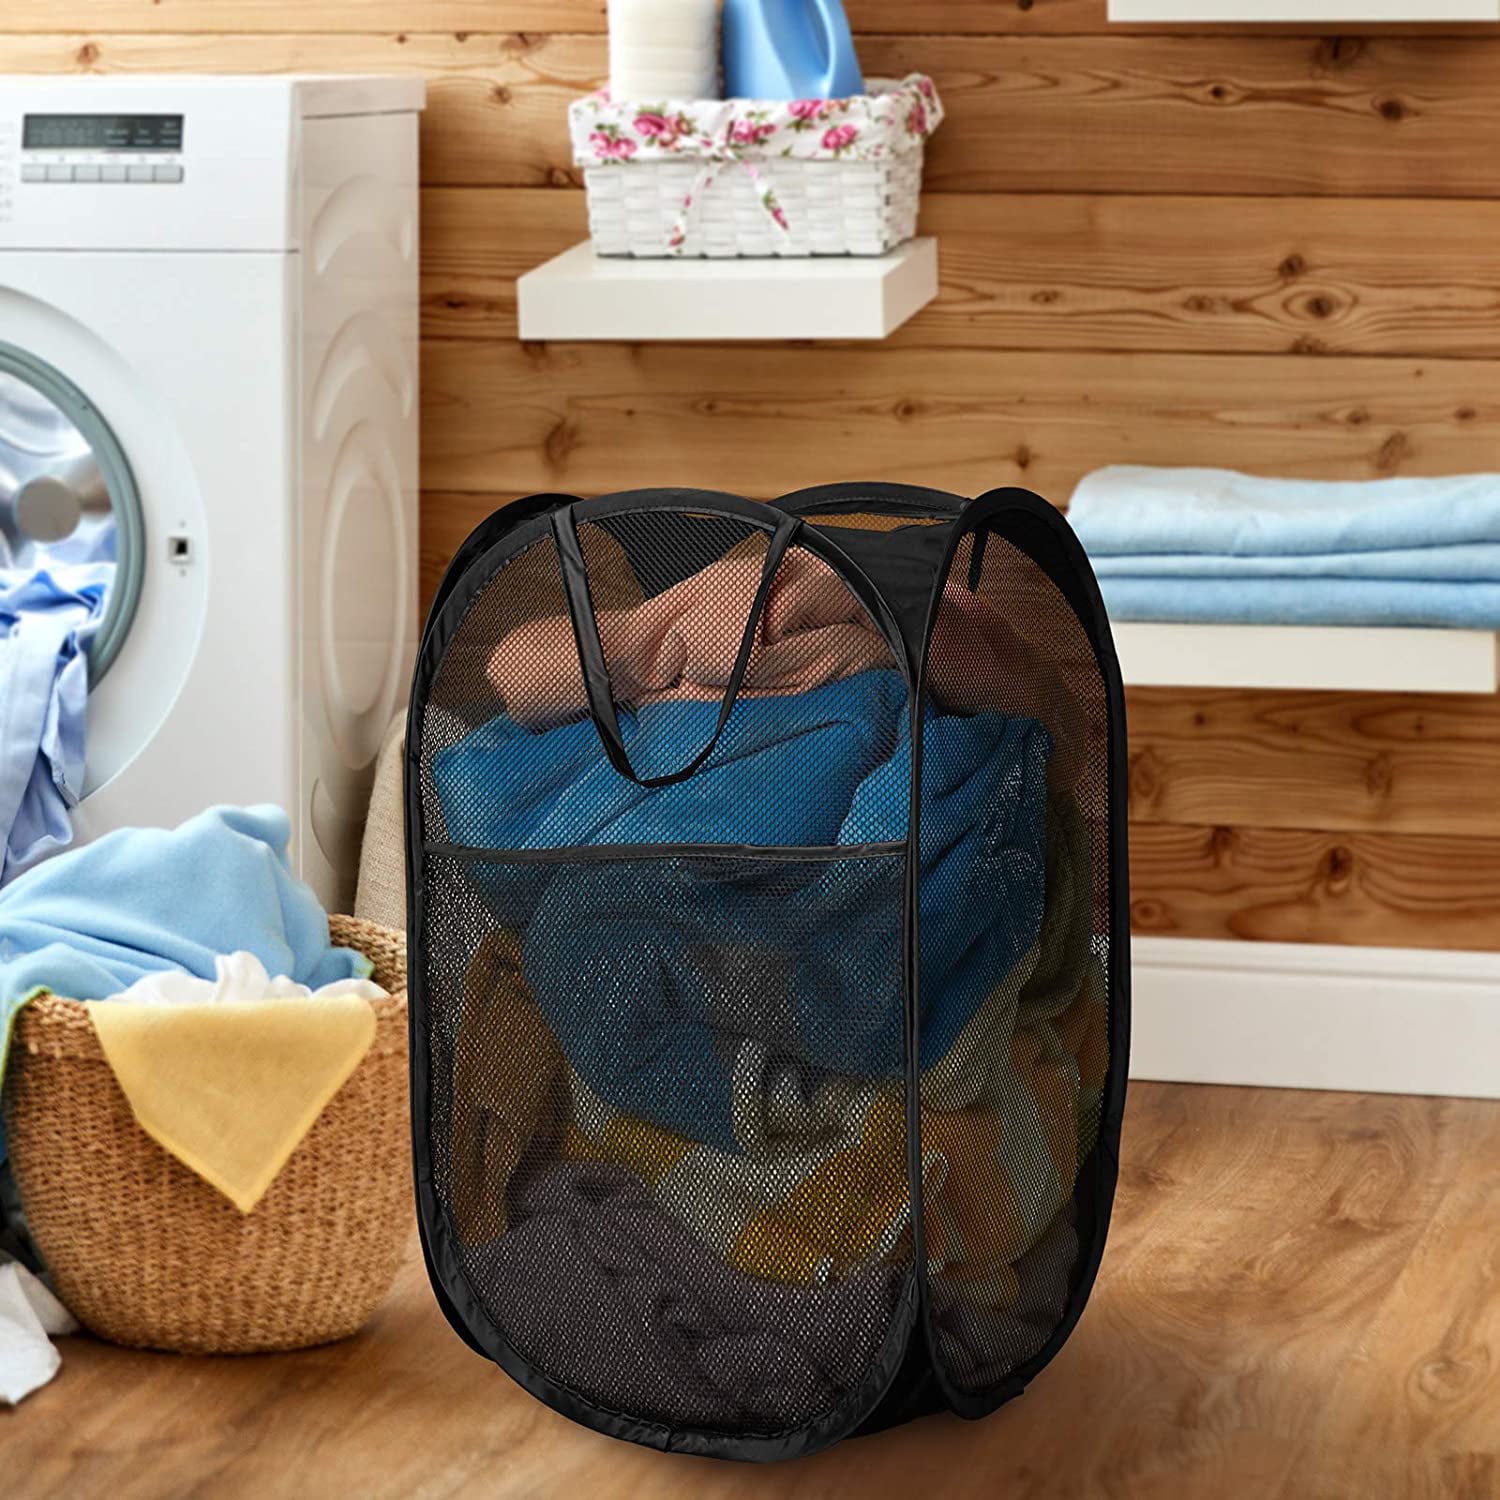 Handy Laundry Mesh Popup Laundry Hamper - Portable, Durable Handles, Collapsible for Storage and Easy to Open. Folding Pop-Up Clothes Hampers